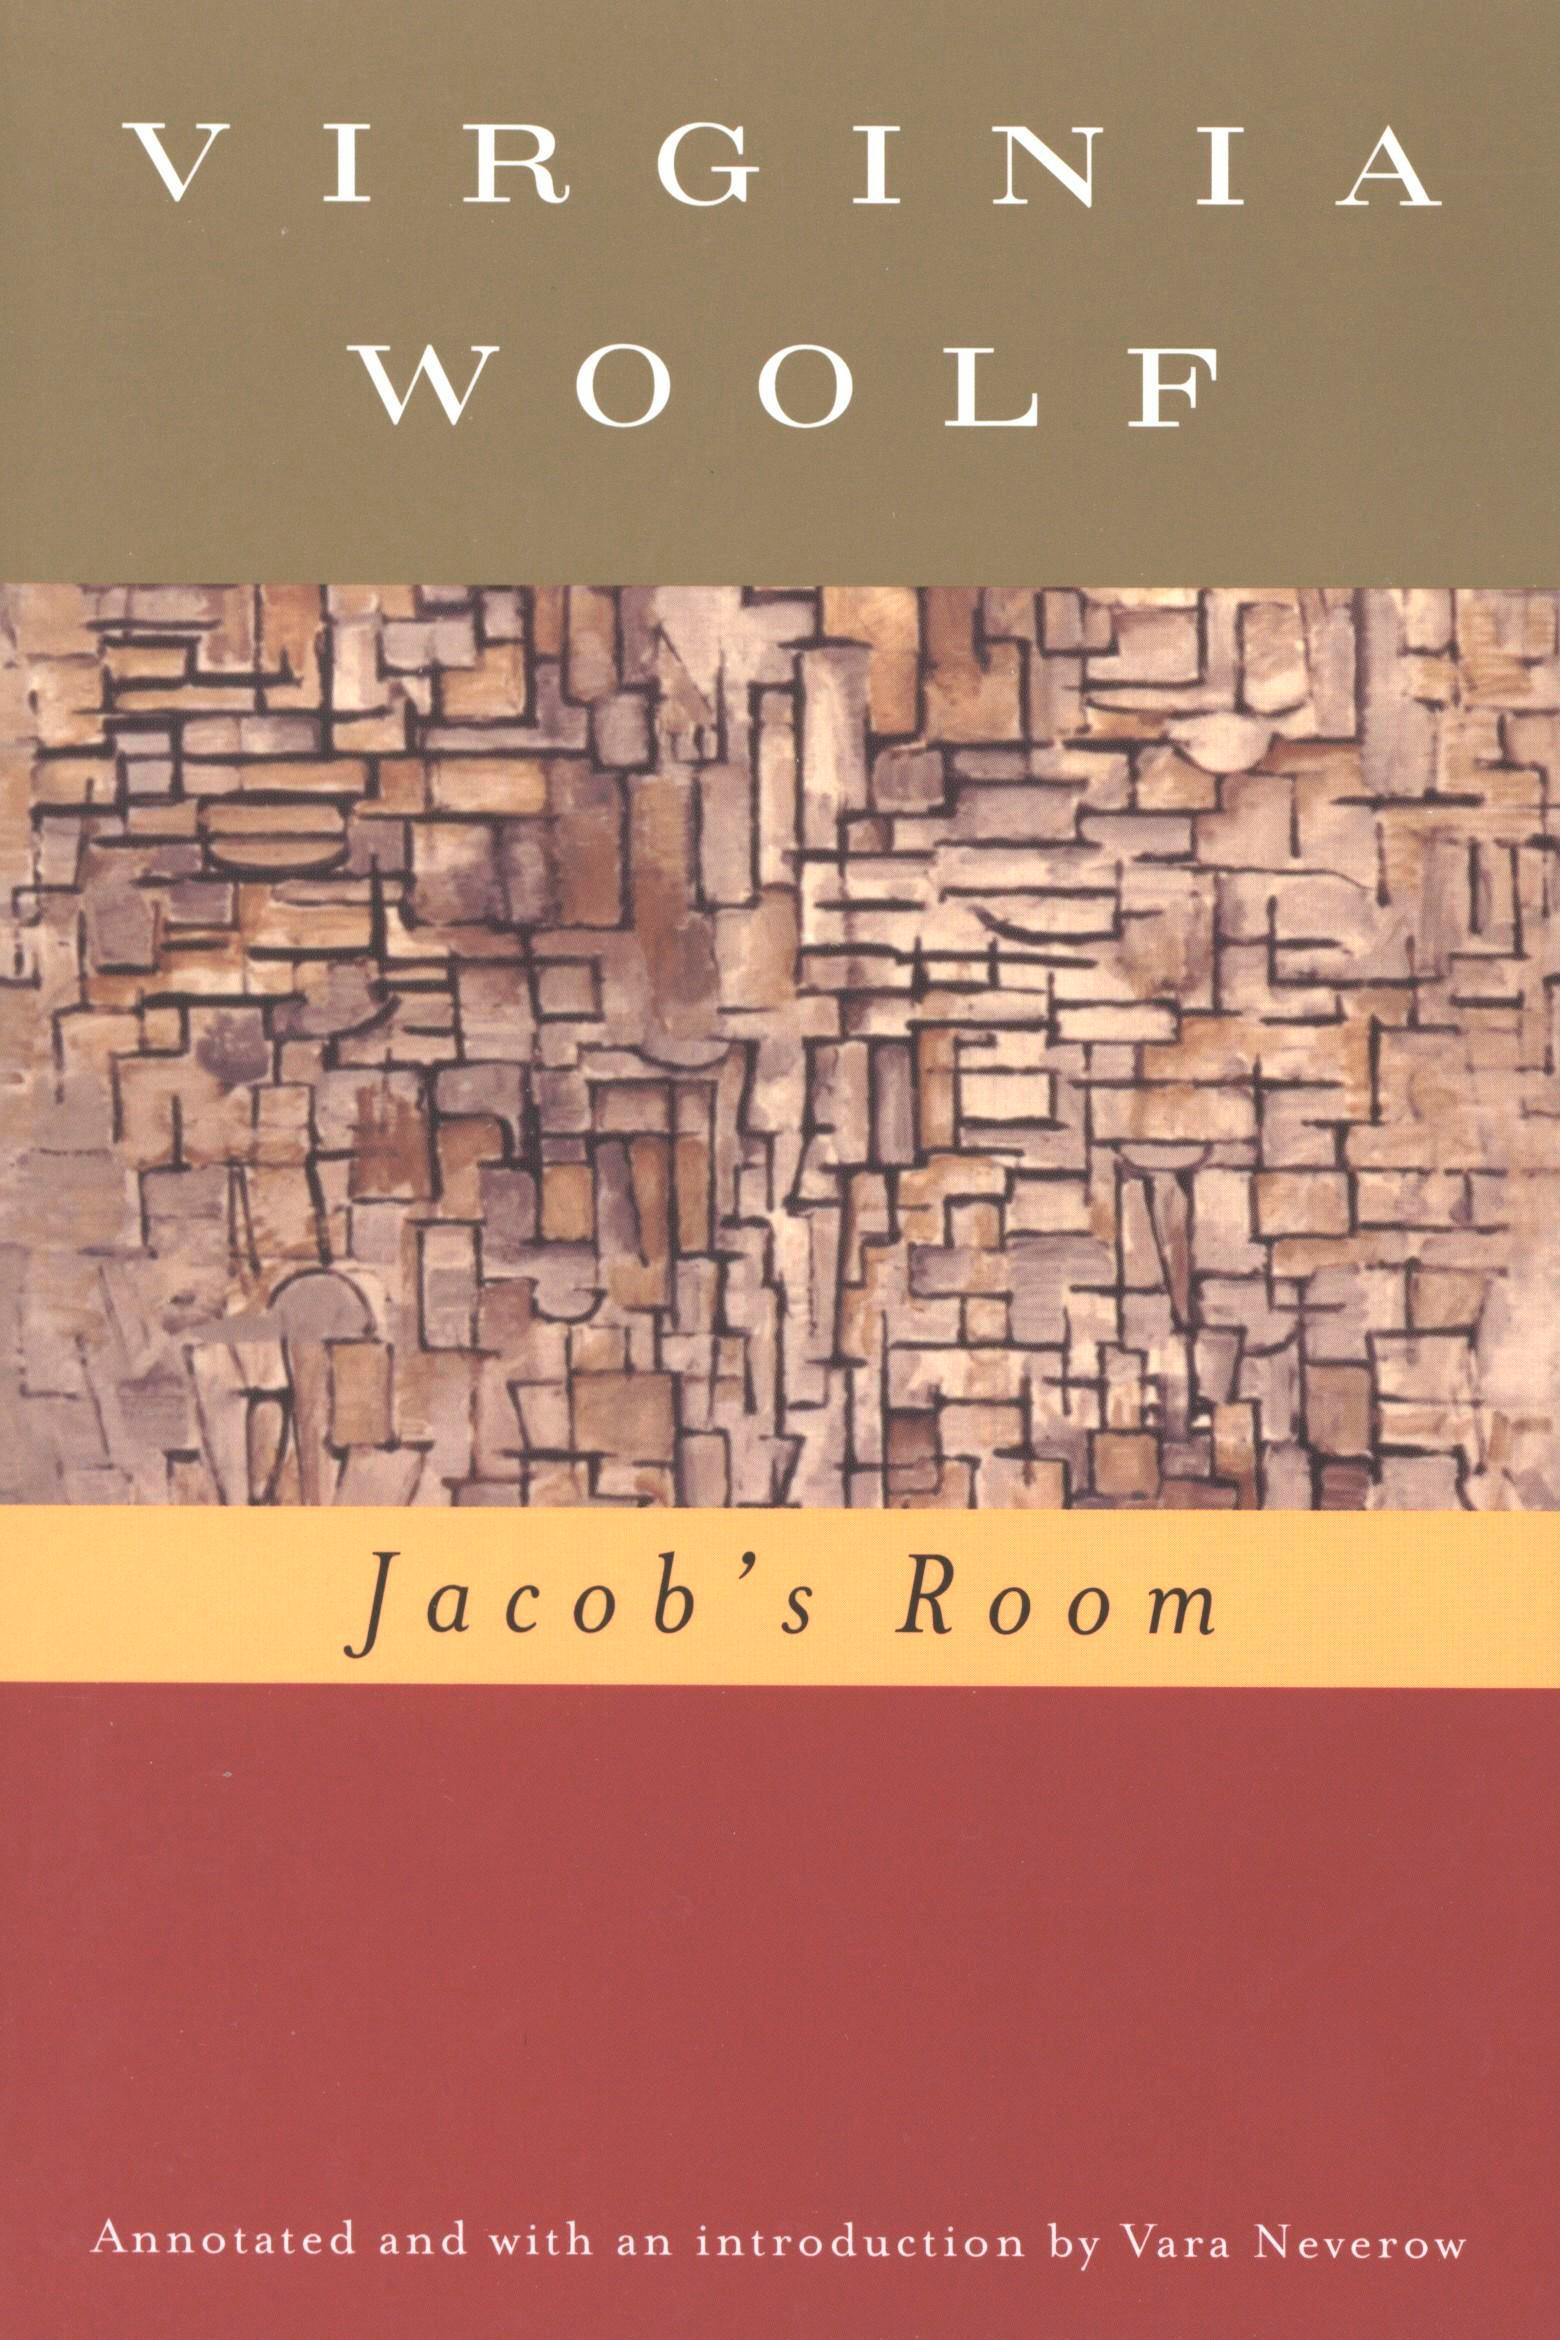 Jacob's Room (annotated) - 10-14.99